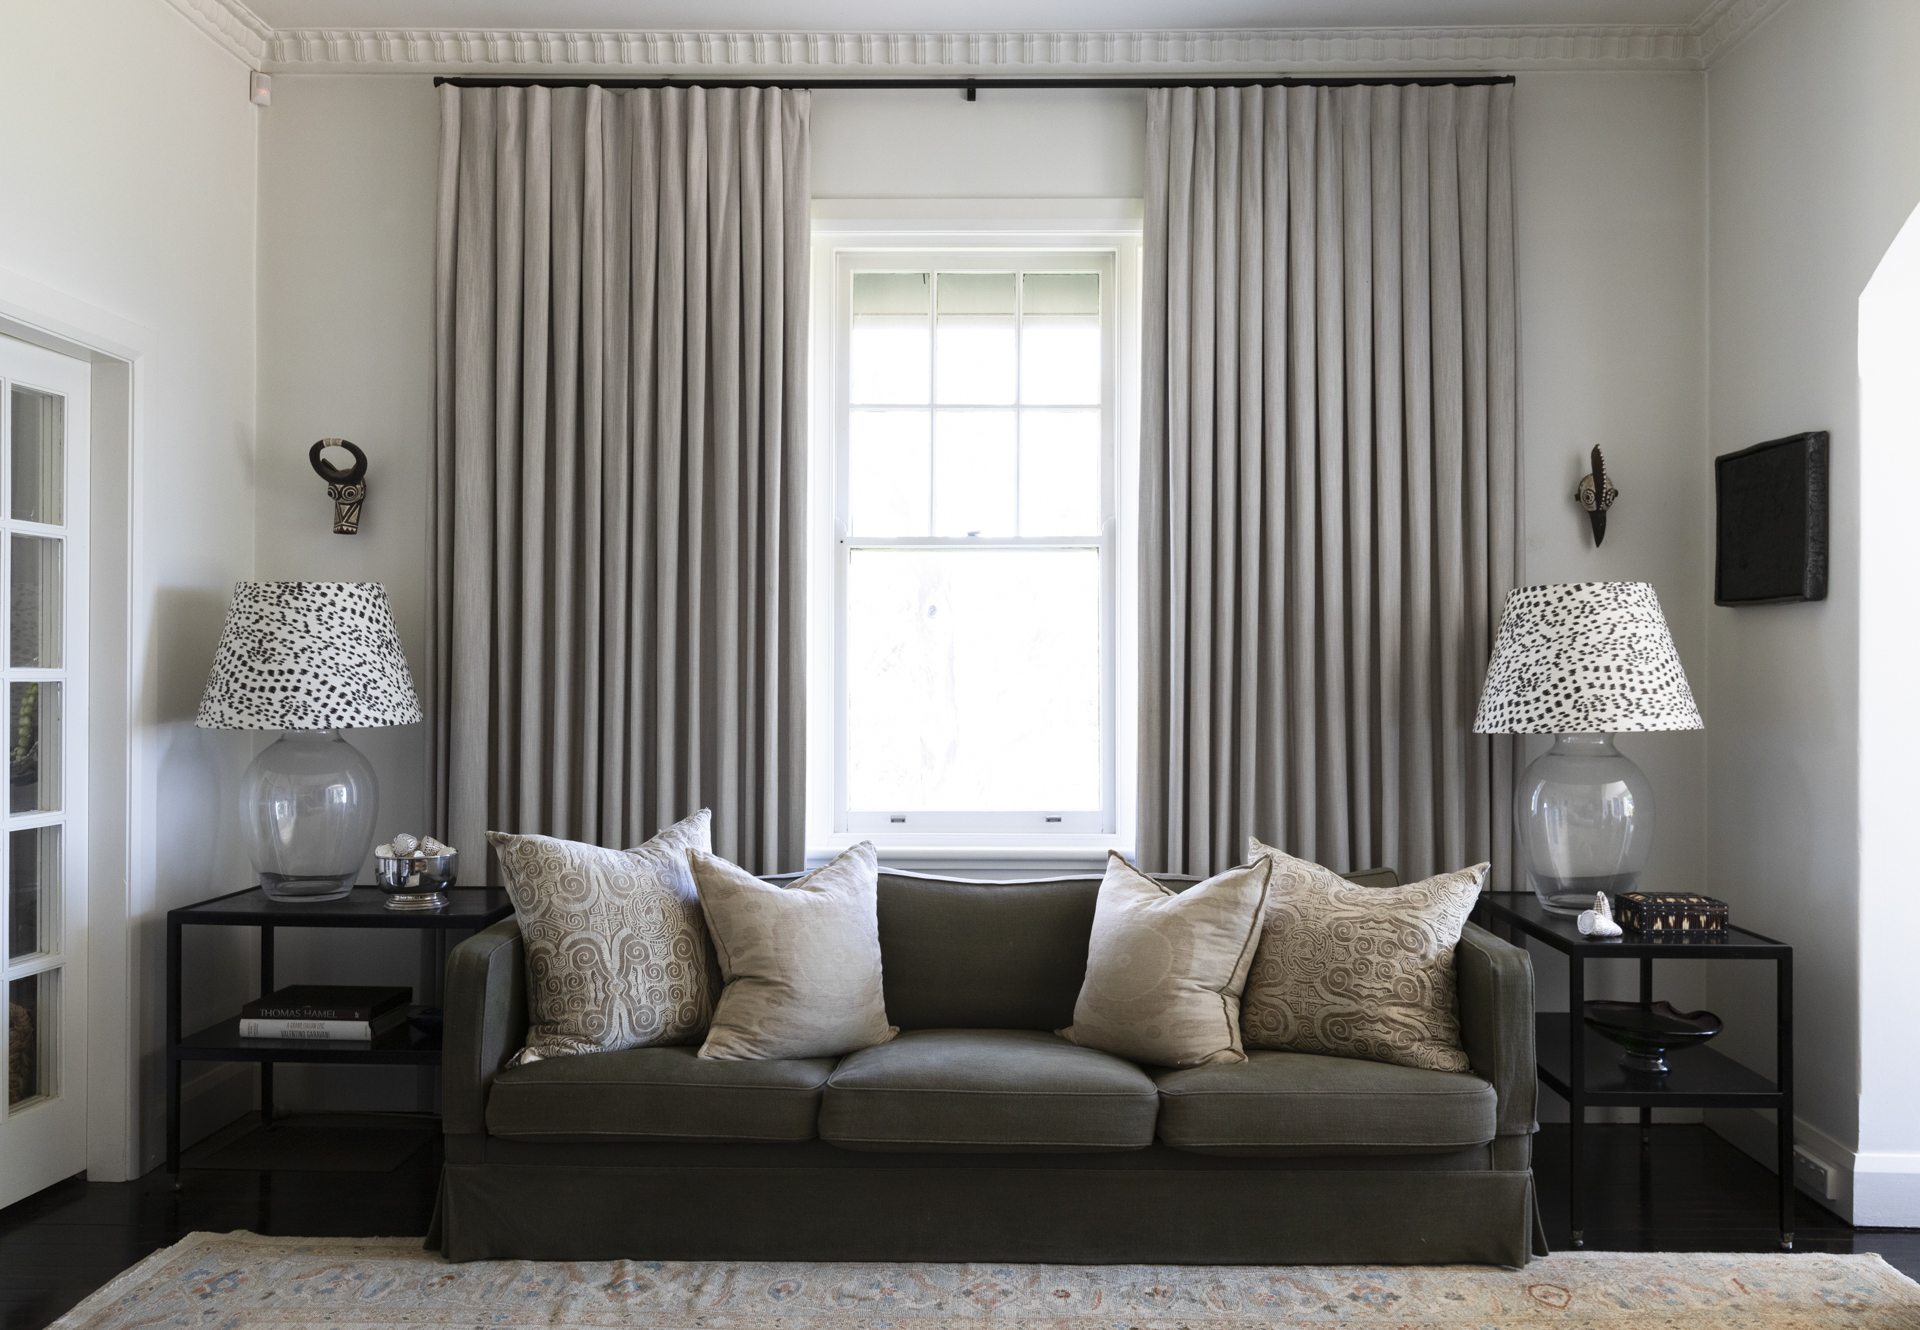 Choosing Curtains &amp; Blinds for your home: The Do’s &amp; Don’ts